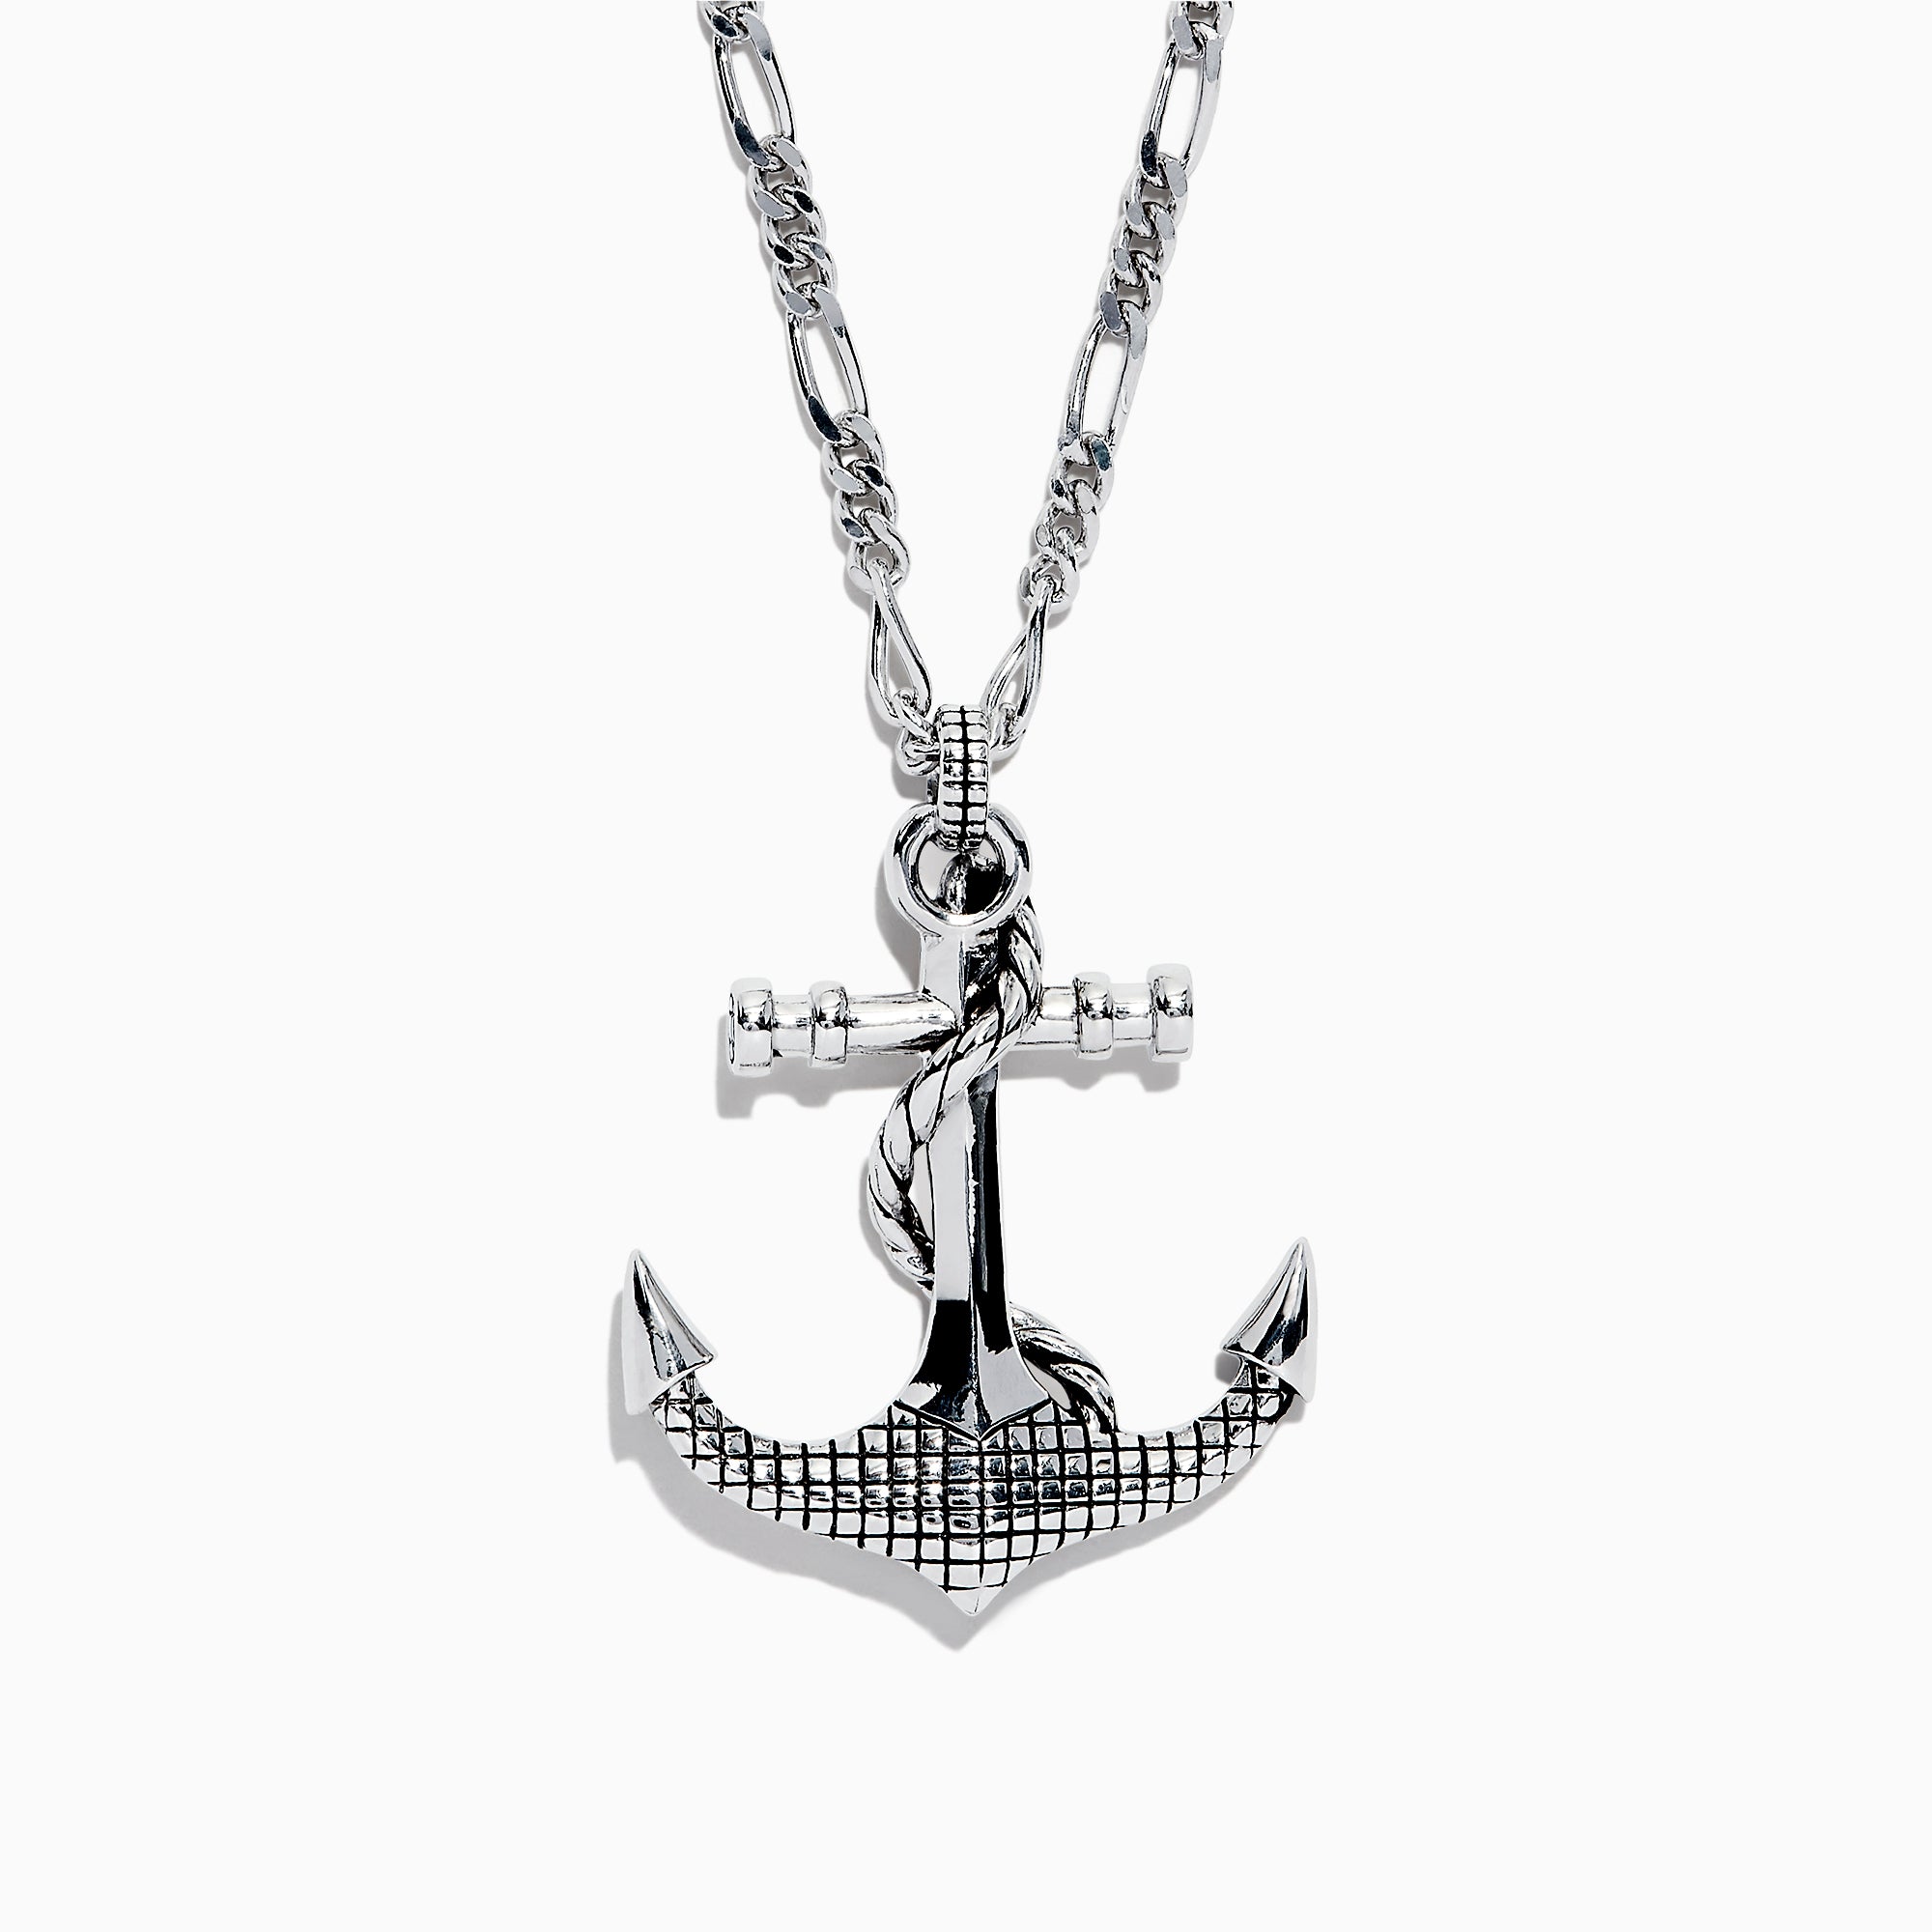 Effy Pendant Silver Anchor Necklace NEW in Package | eBay